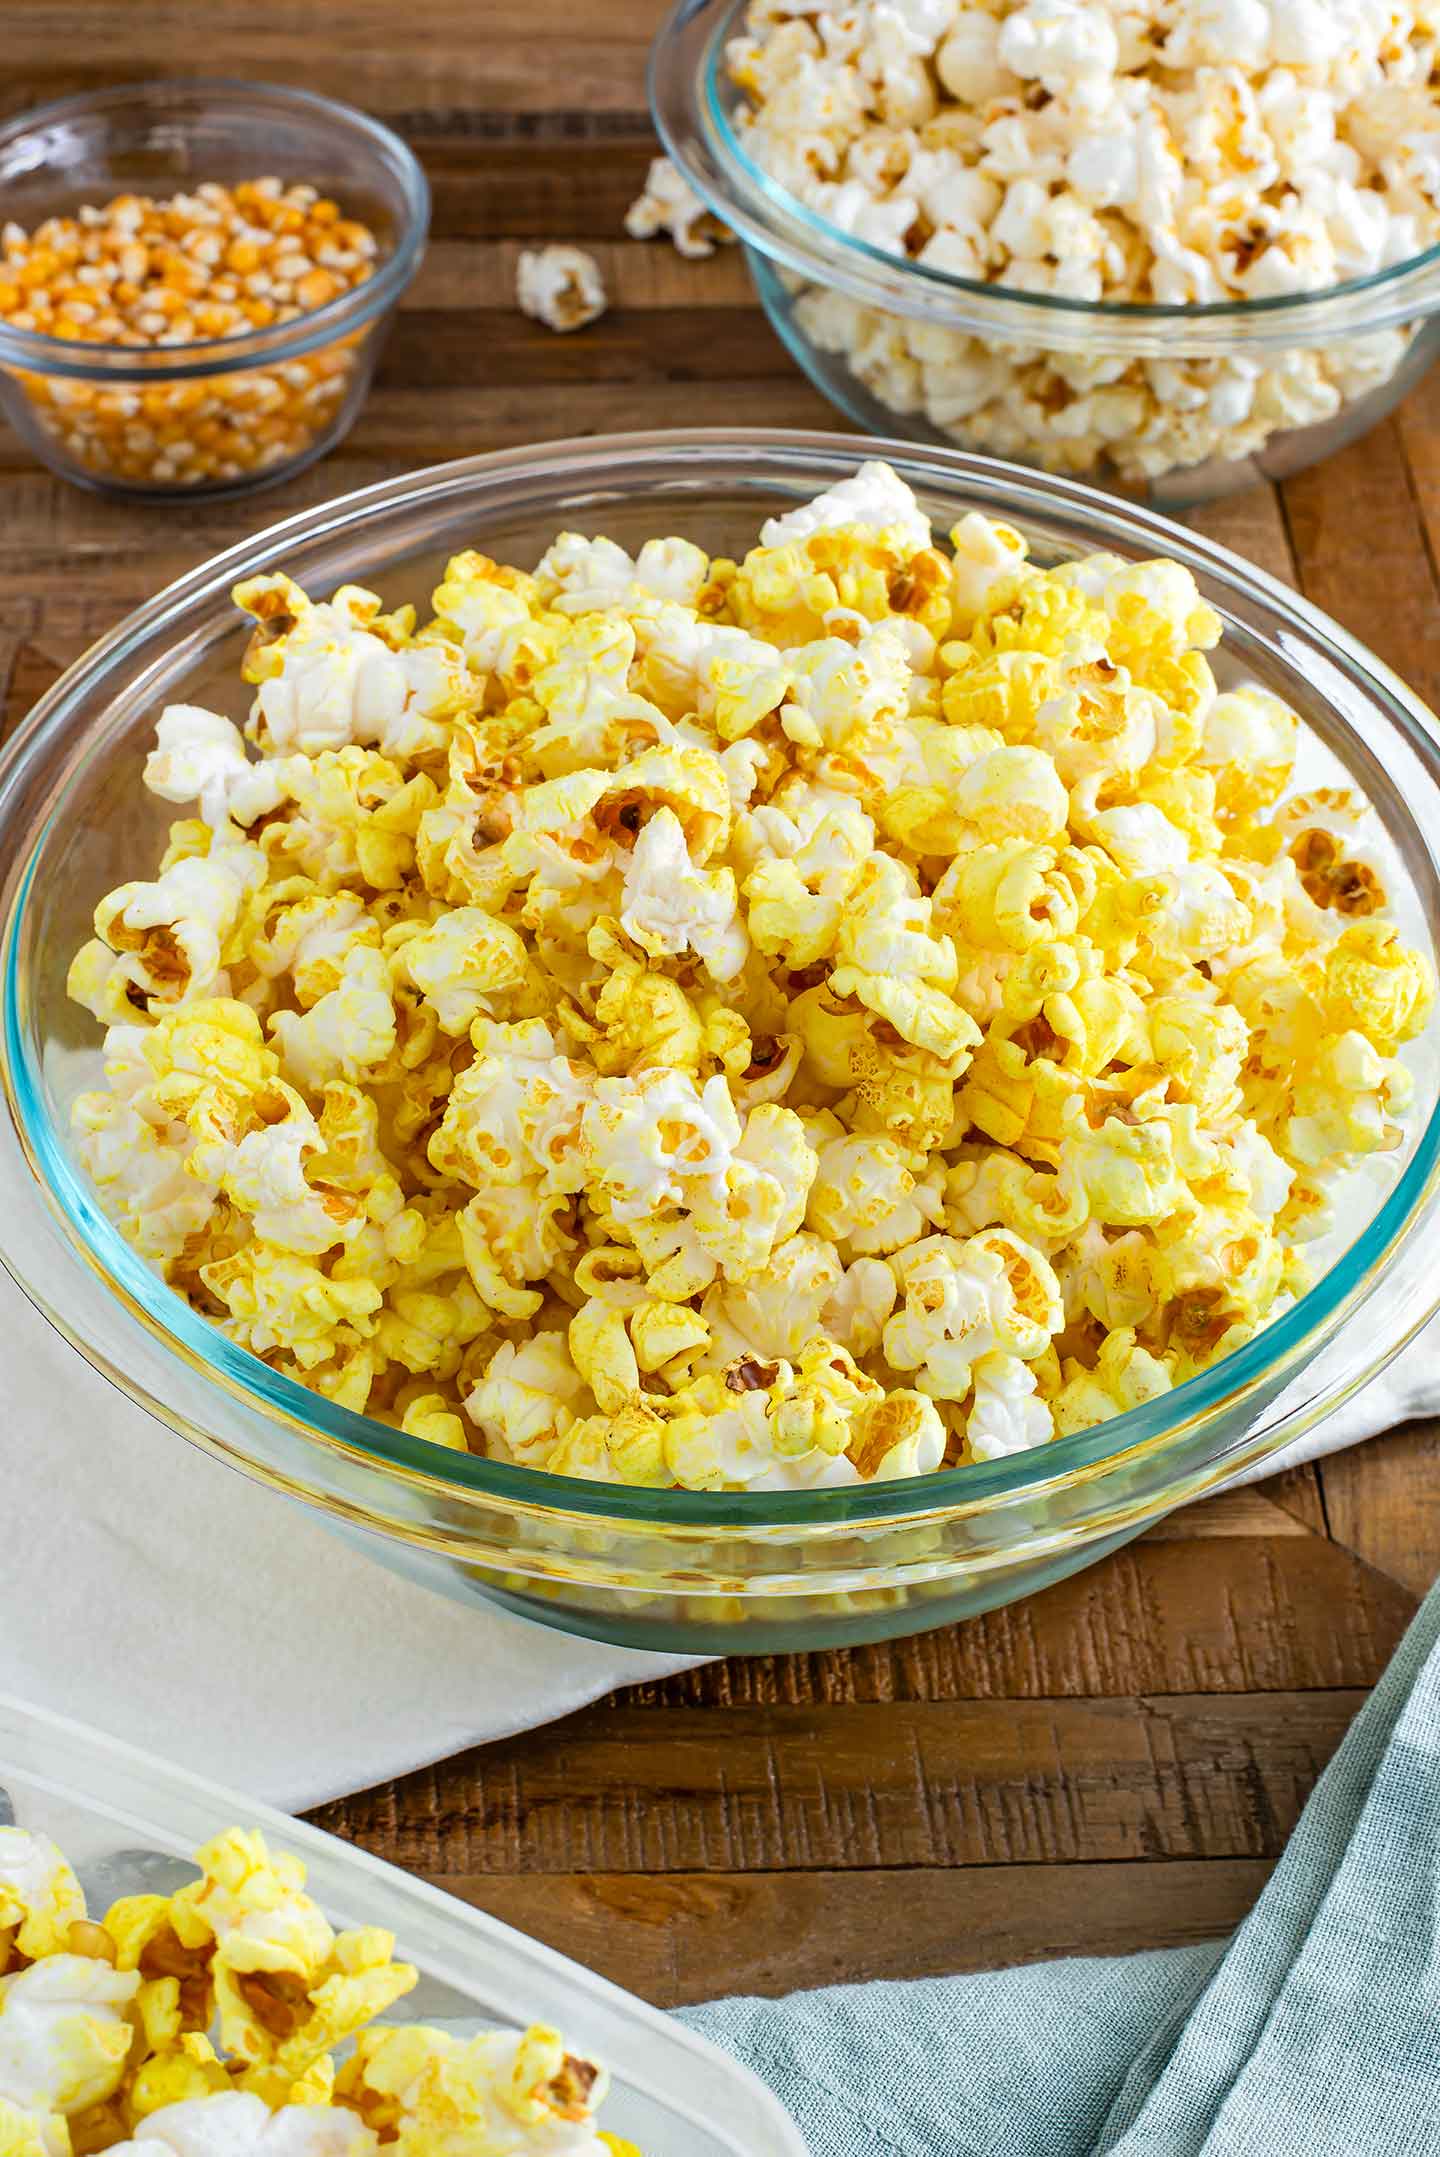 https://tastythriftytimely.com/wp-content/uploads/2022/03/Stovetop-Popcorn-Better-Than-Movie-Theatre-6.jpg